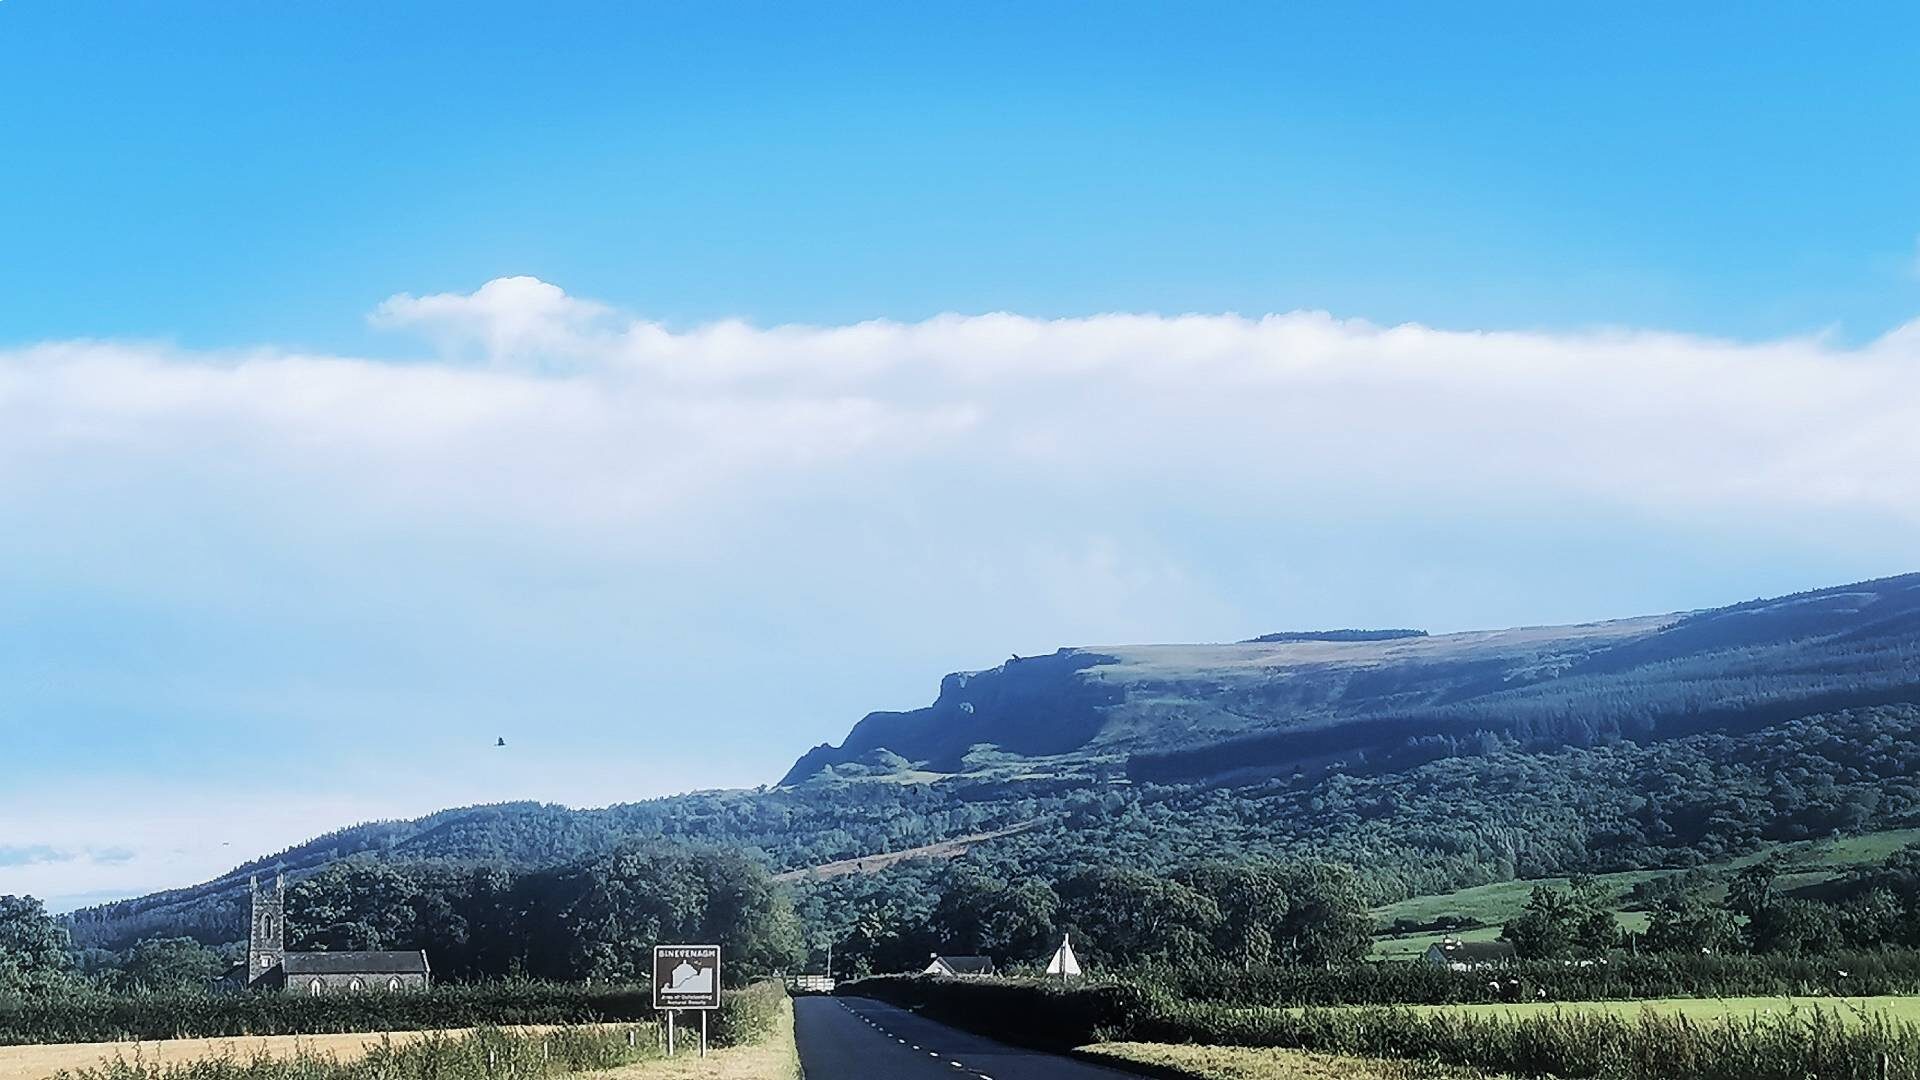 Binevenagh is an area of outstanding natural beauty. The craggy Binevenagh Mountain offers spectacular views over the Atlantic coast at Downhill, Co. Londonderry.